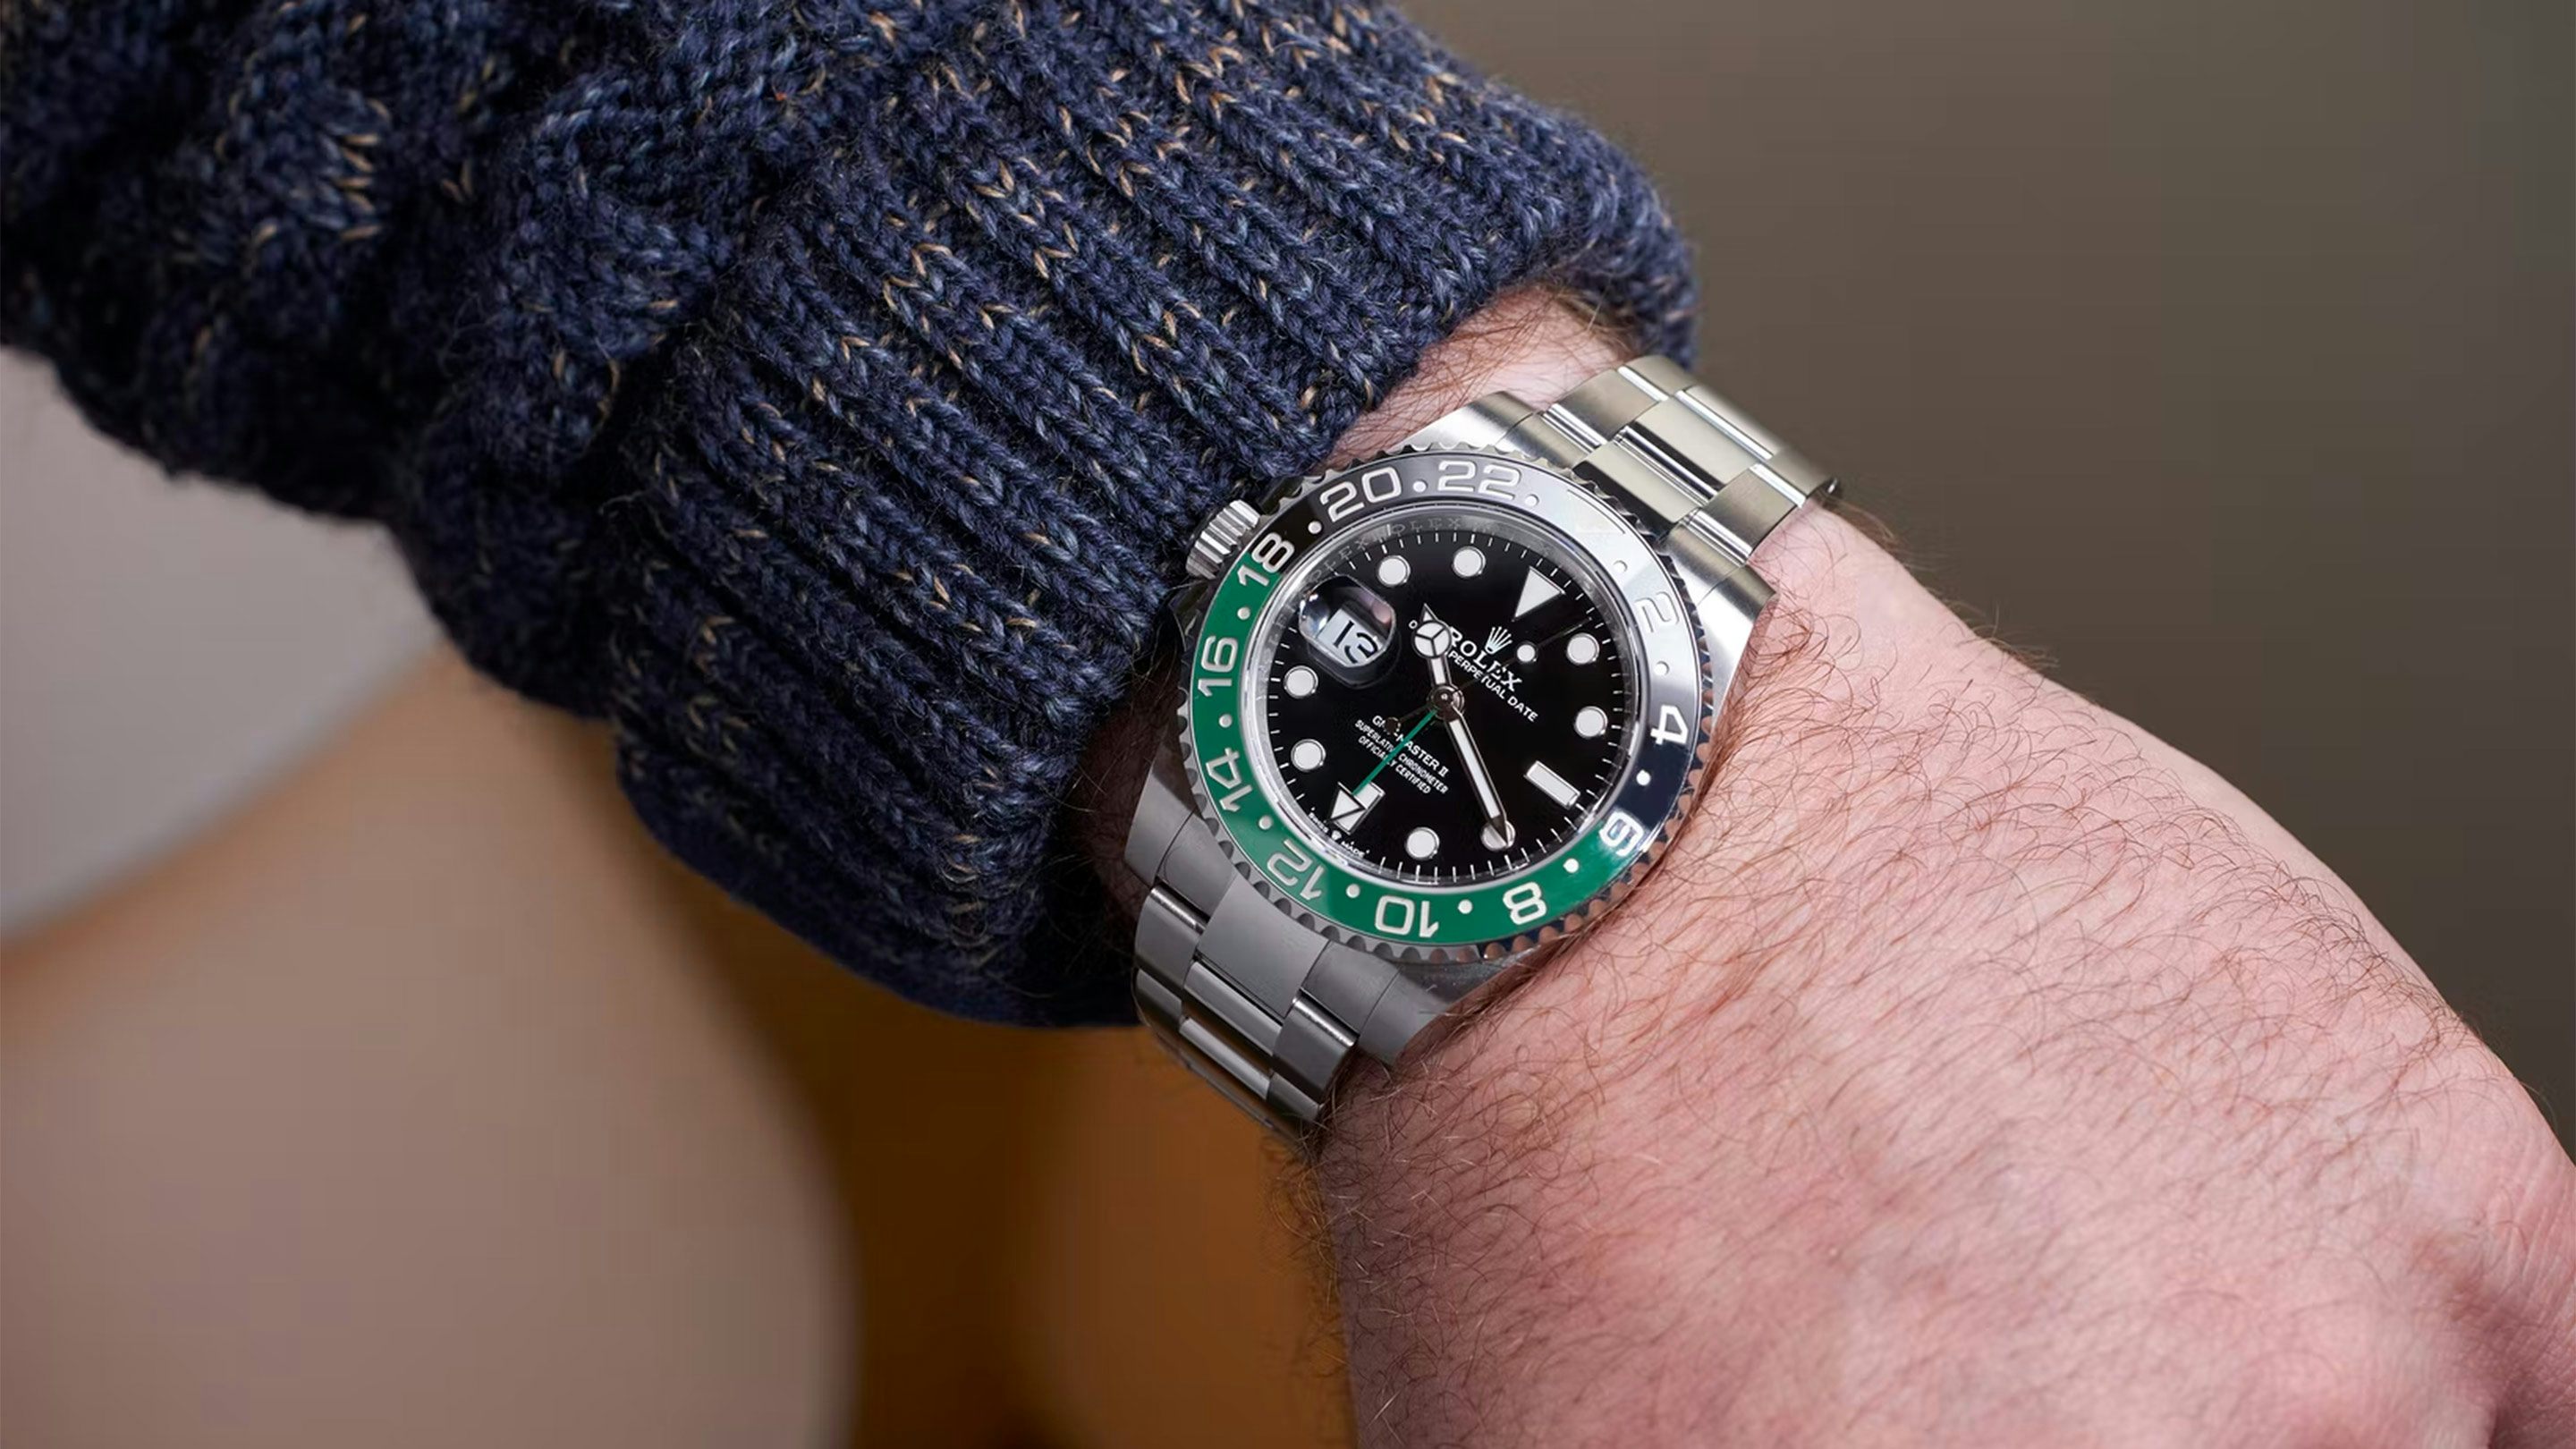 Rolex Shortage 2022 Due To Underproduction Or Excessive Demand?